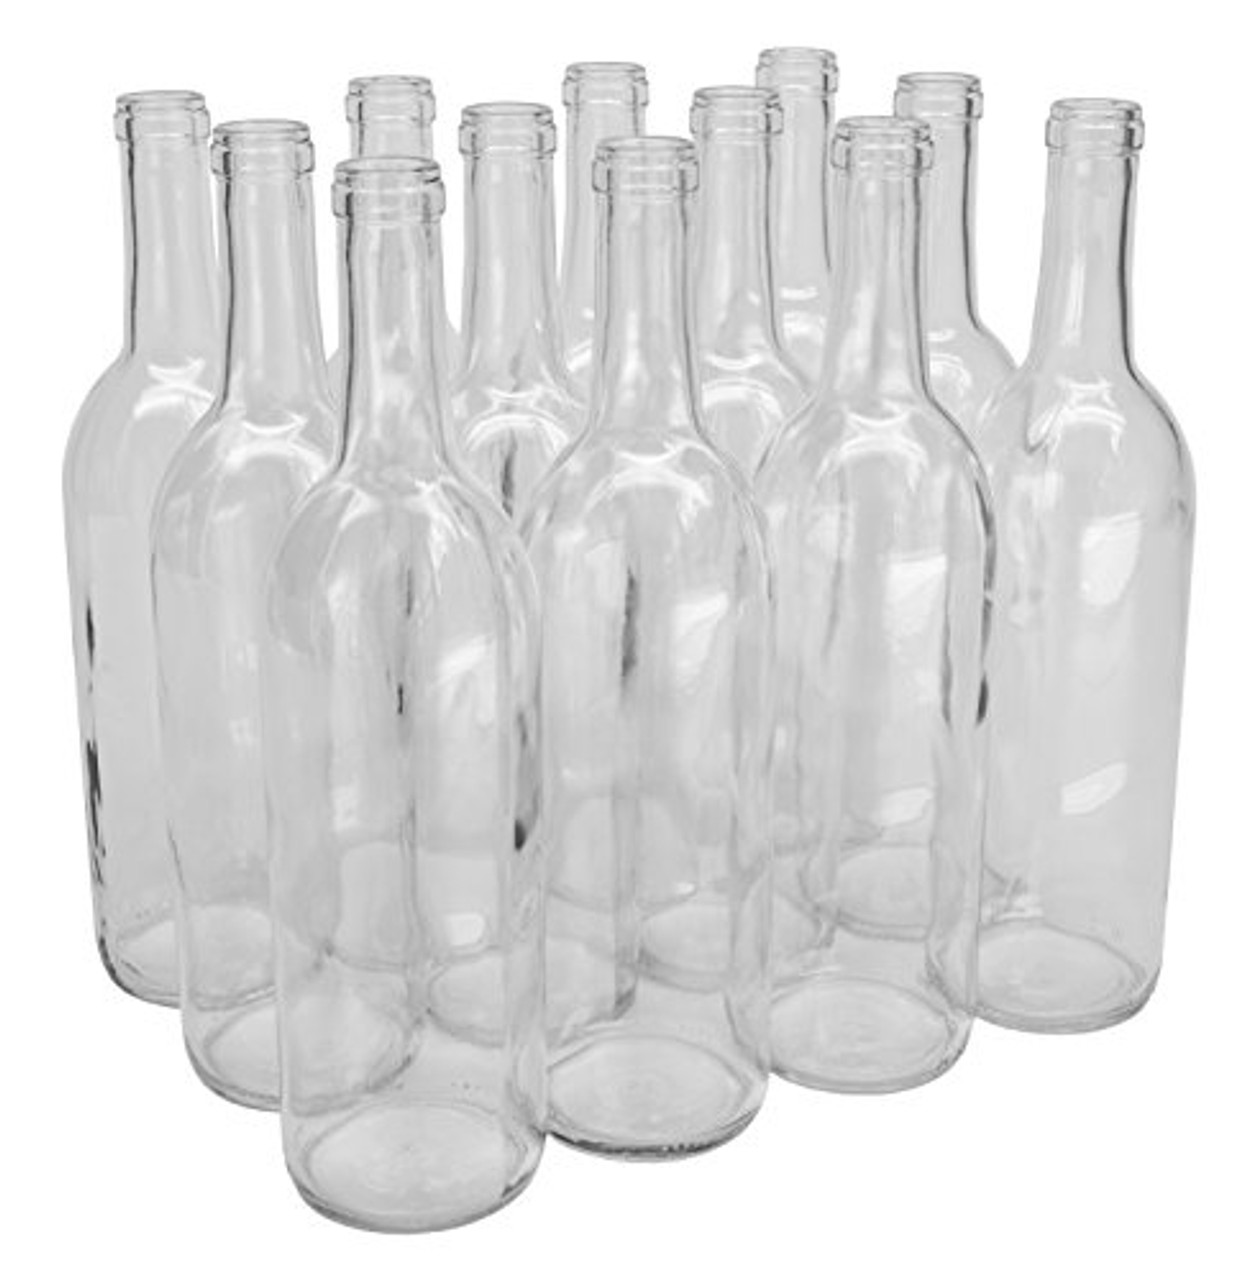 12 Clear 750 mL Wine Bottles with 18MM Metal Screw Caps Finish,Wine Making botte 